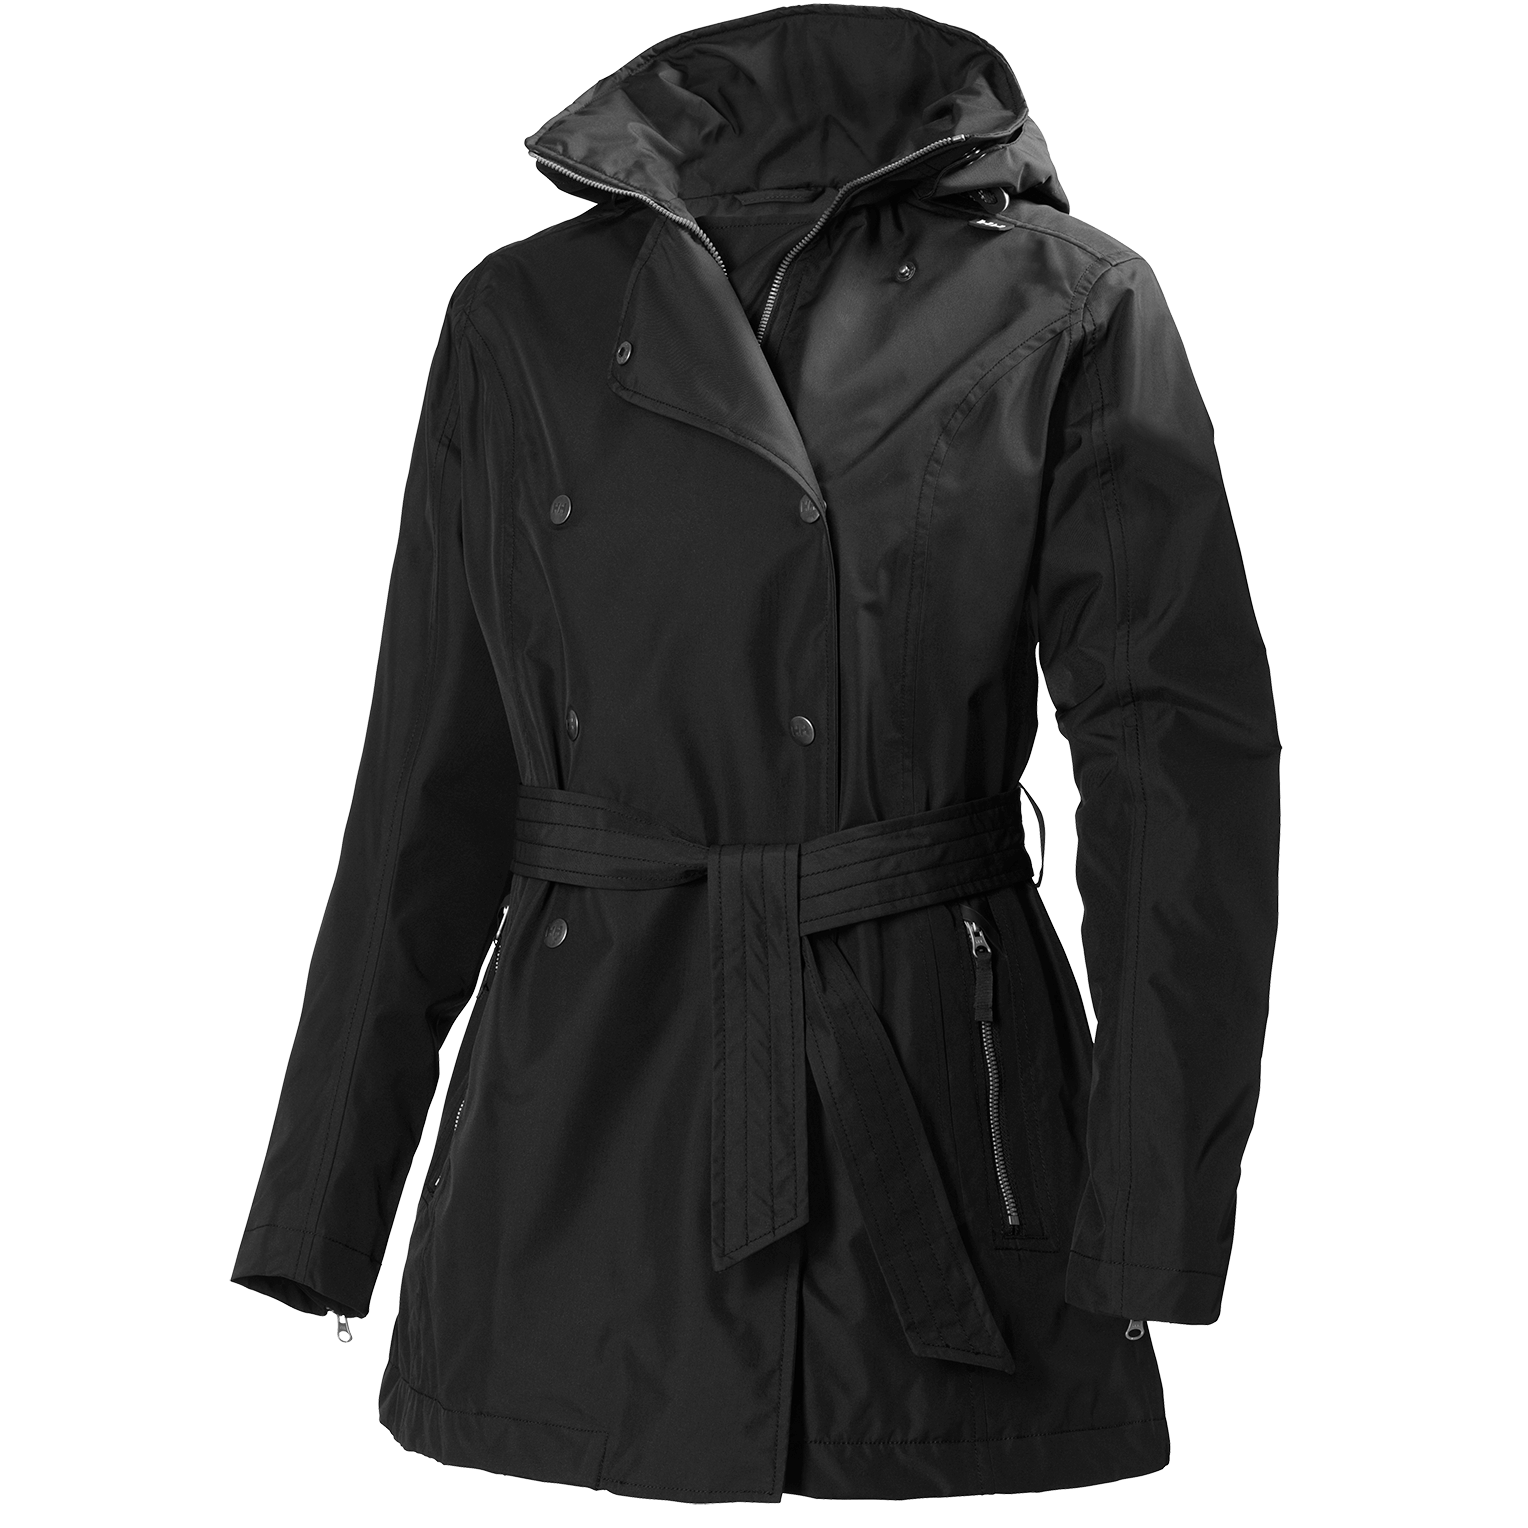 Trench Coat PNG HD - 127873